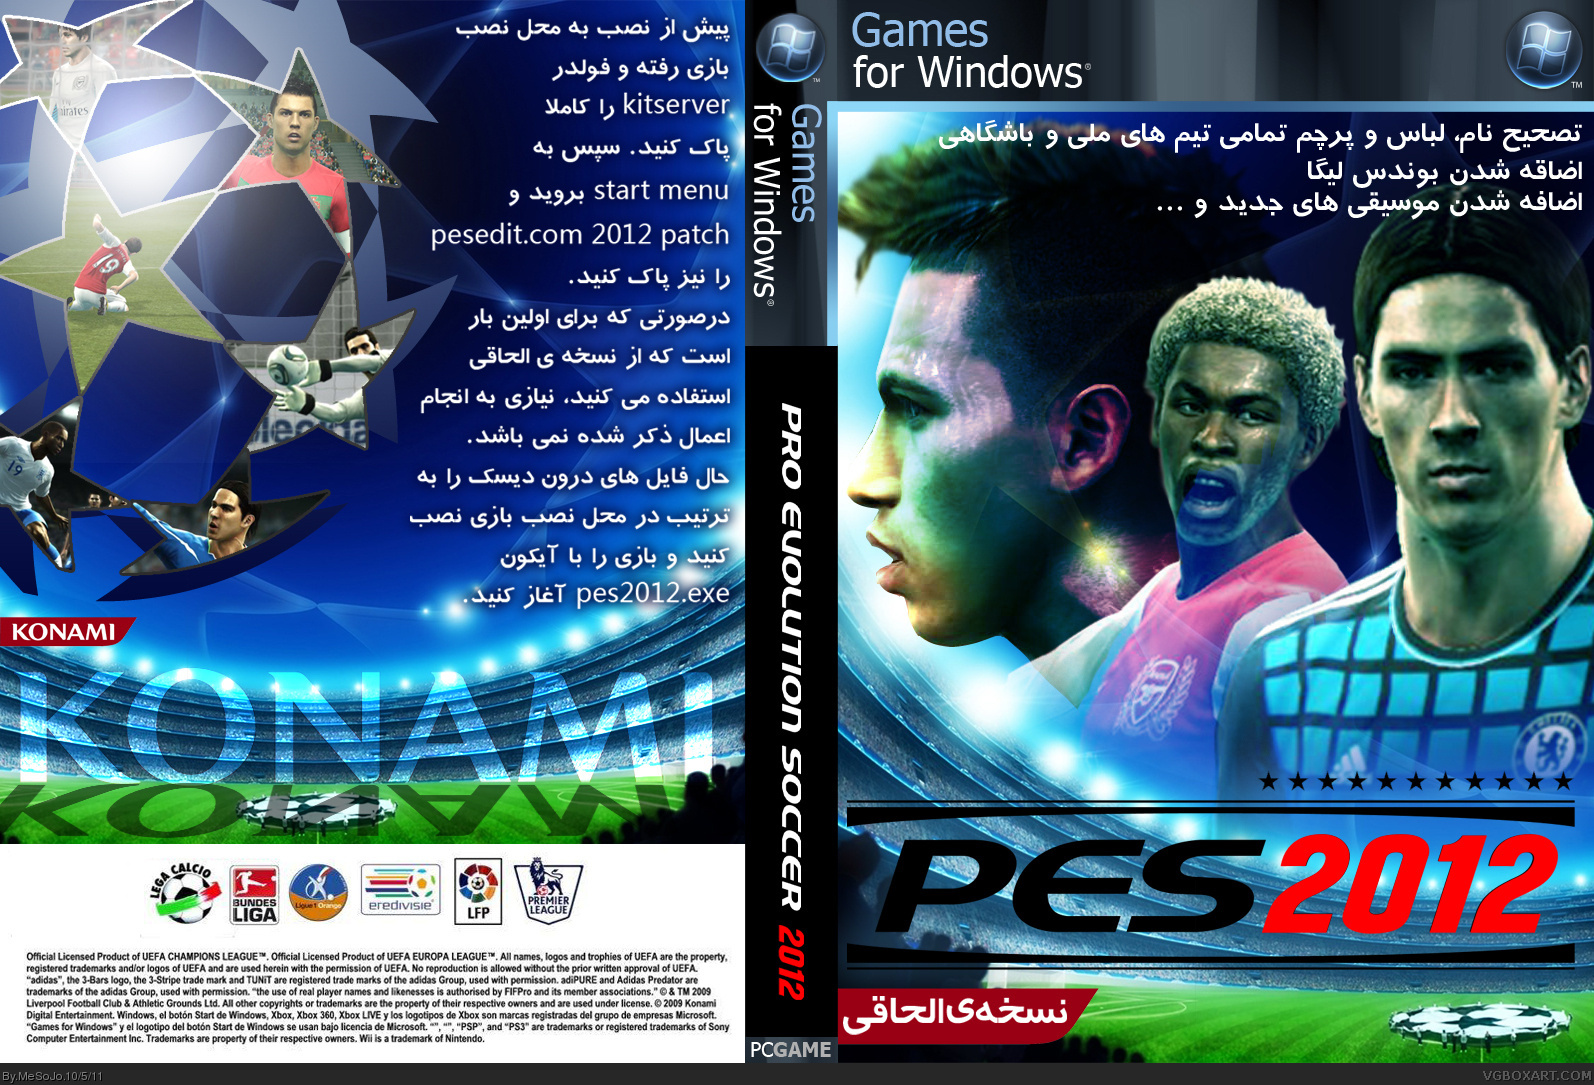 Pro Evolution Soccer 2012 Patch (Persian Language) box cover